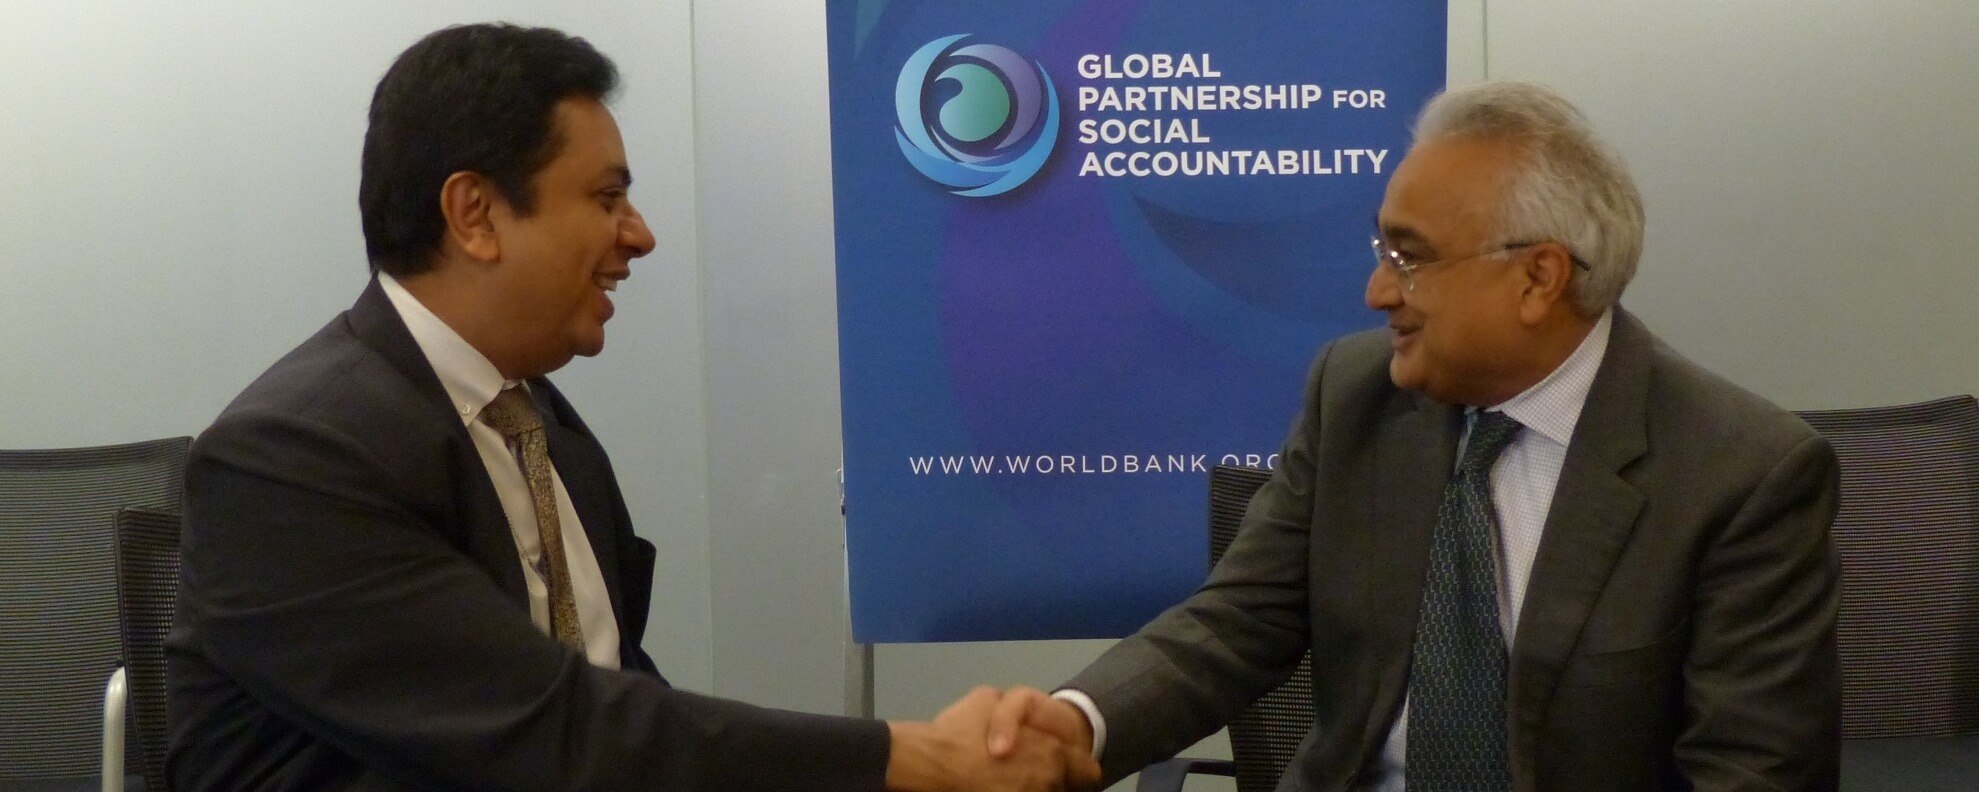 Representing the World Bank Group, Mr. Sanjay Pradhan, Vice President for Change, Knowledge and Learning, shakes hands with Dr. Mirza Jahani, CEO of Aga Khan Foundation U.S.A